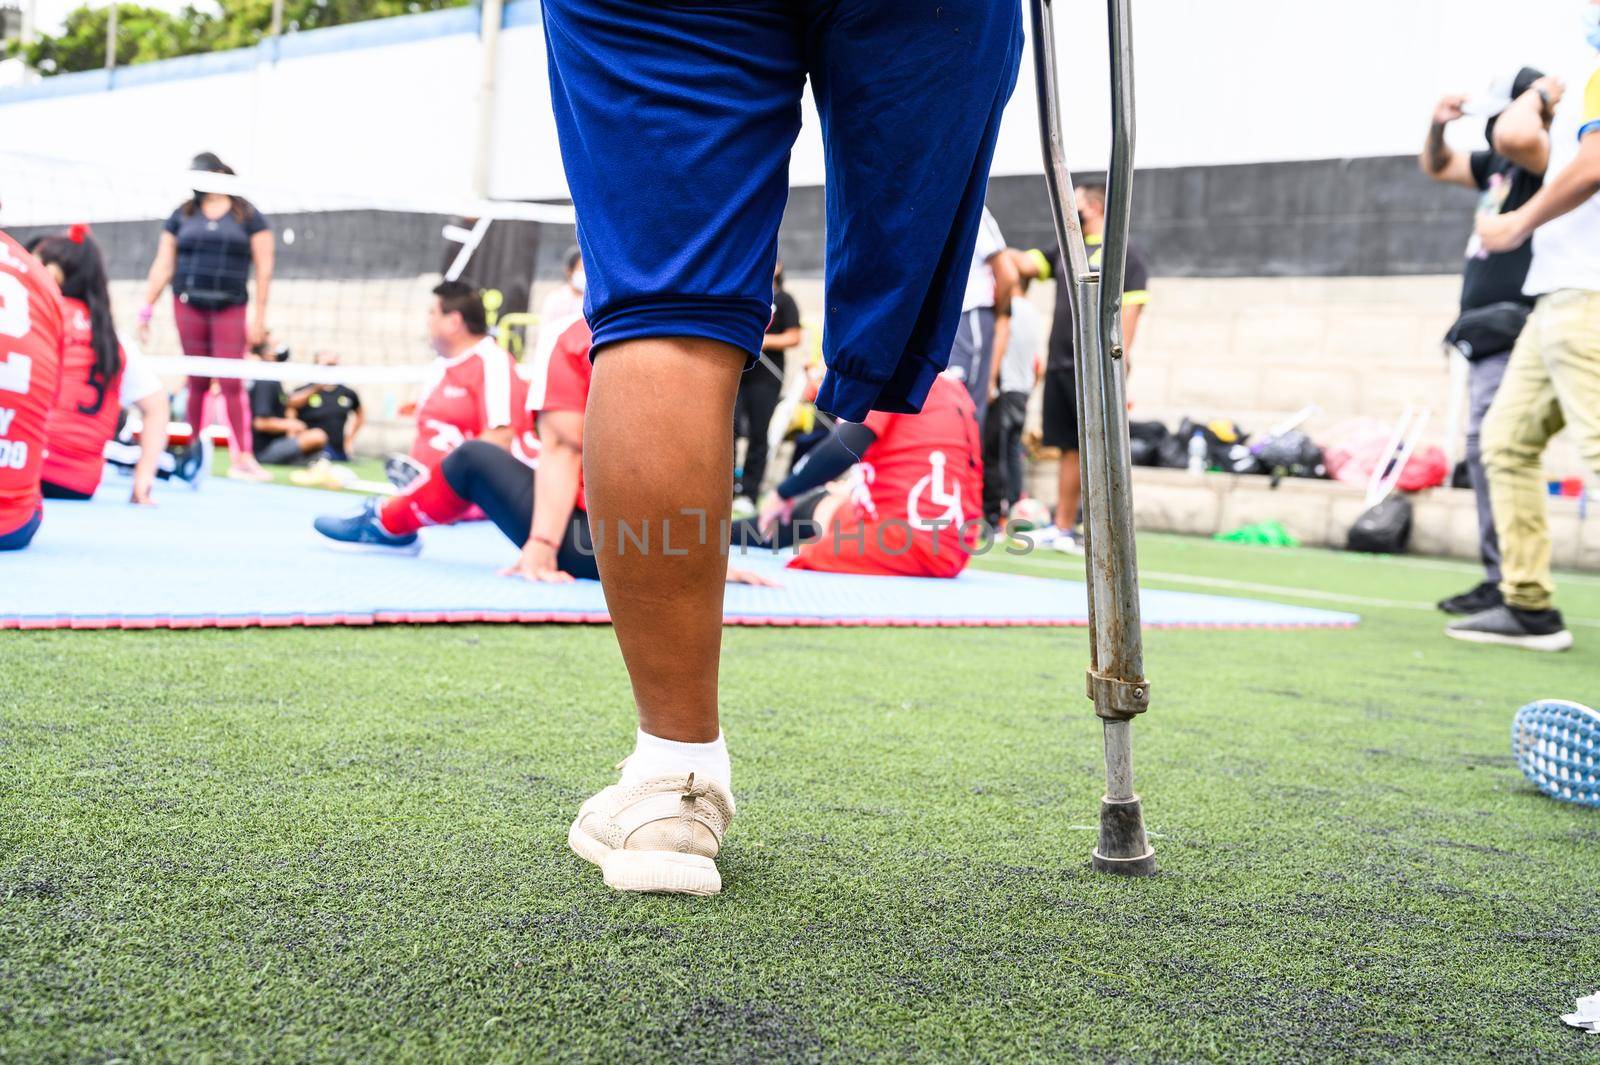 Disabled man with one leg on crutches watching a match. by Peruphotoart